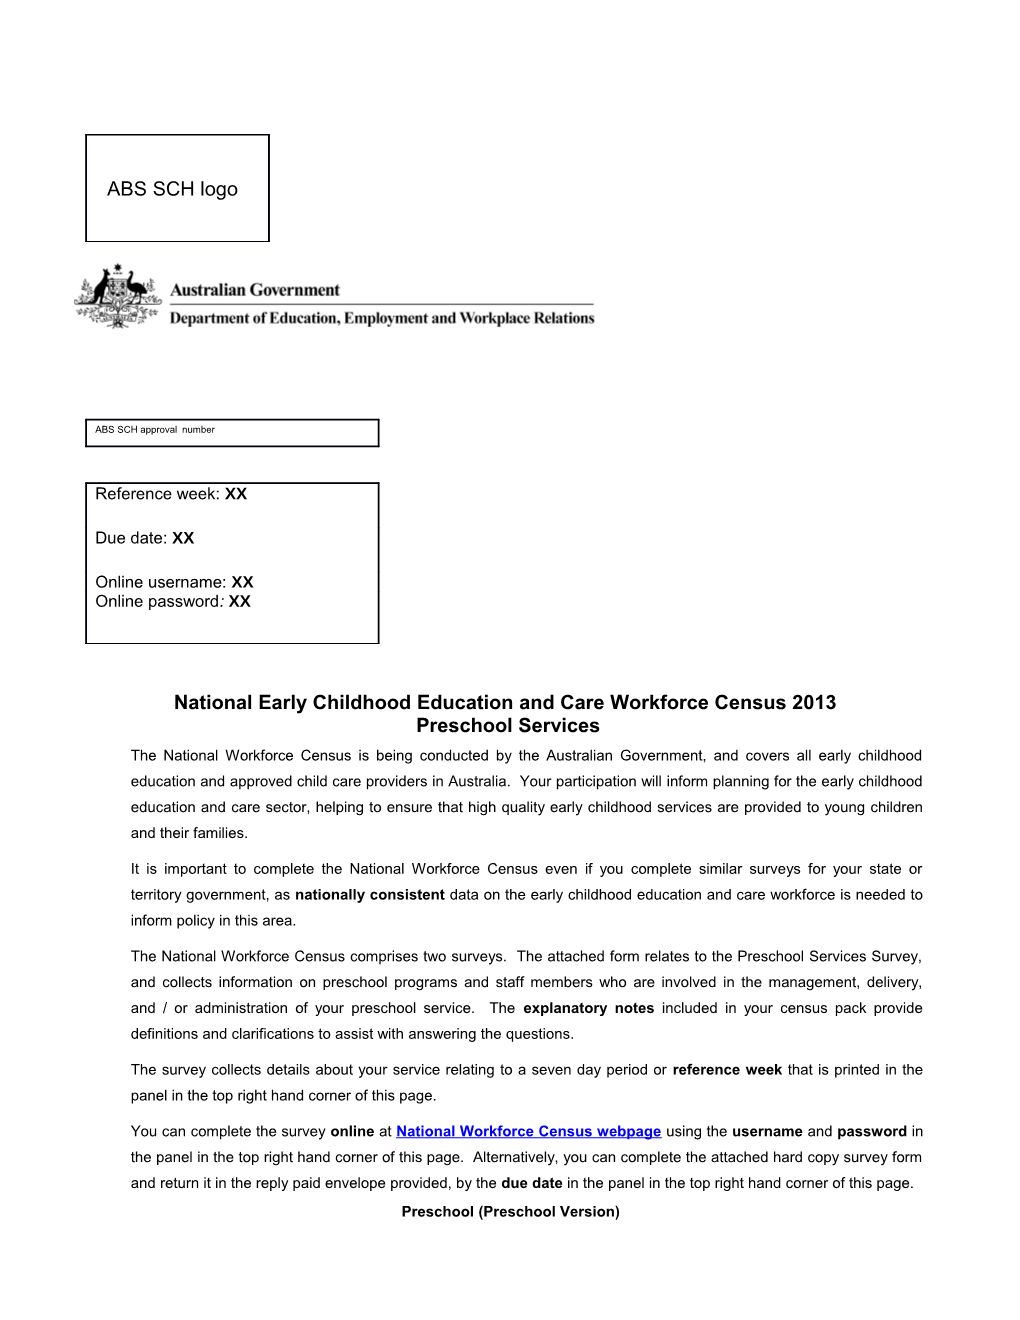 National Early Childhood Education and Care Workforce Census 2013